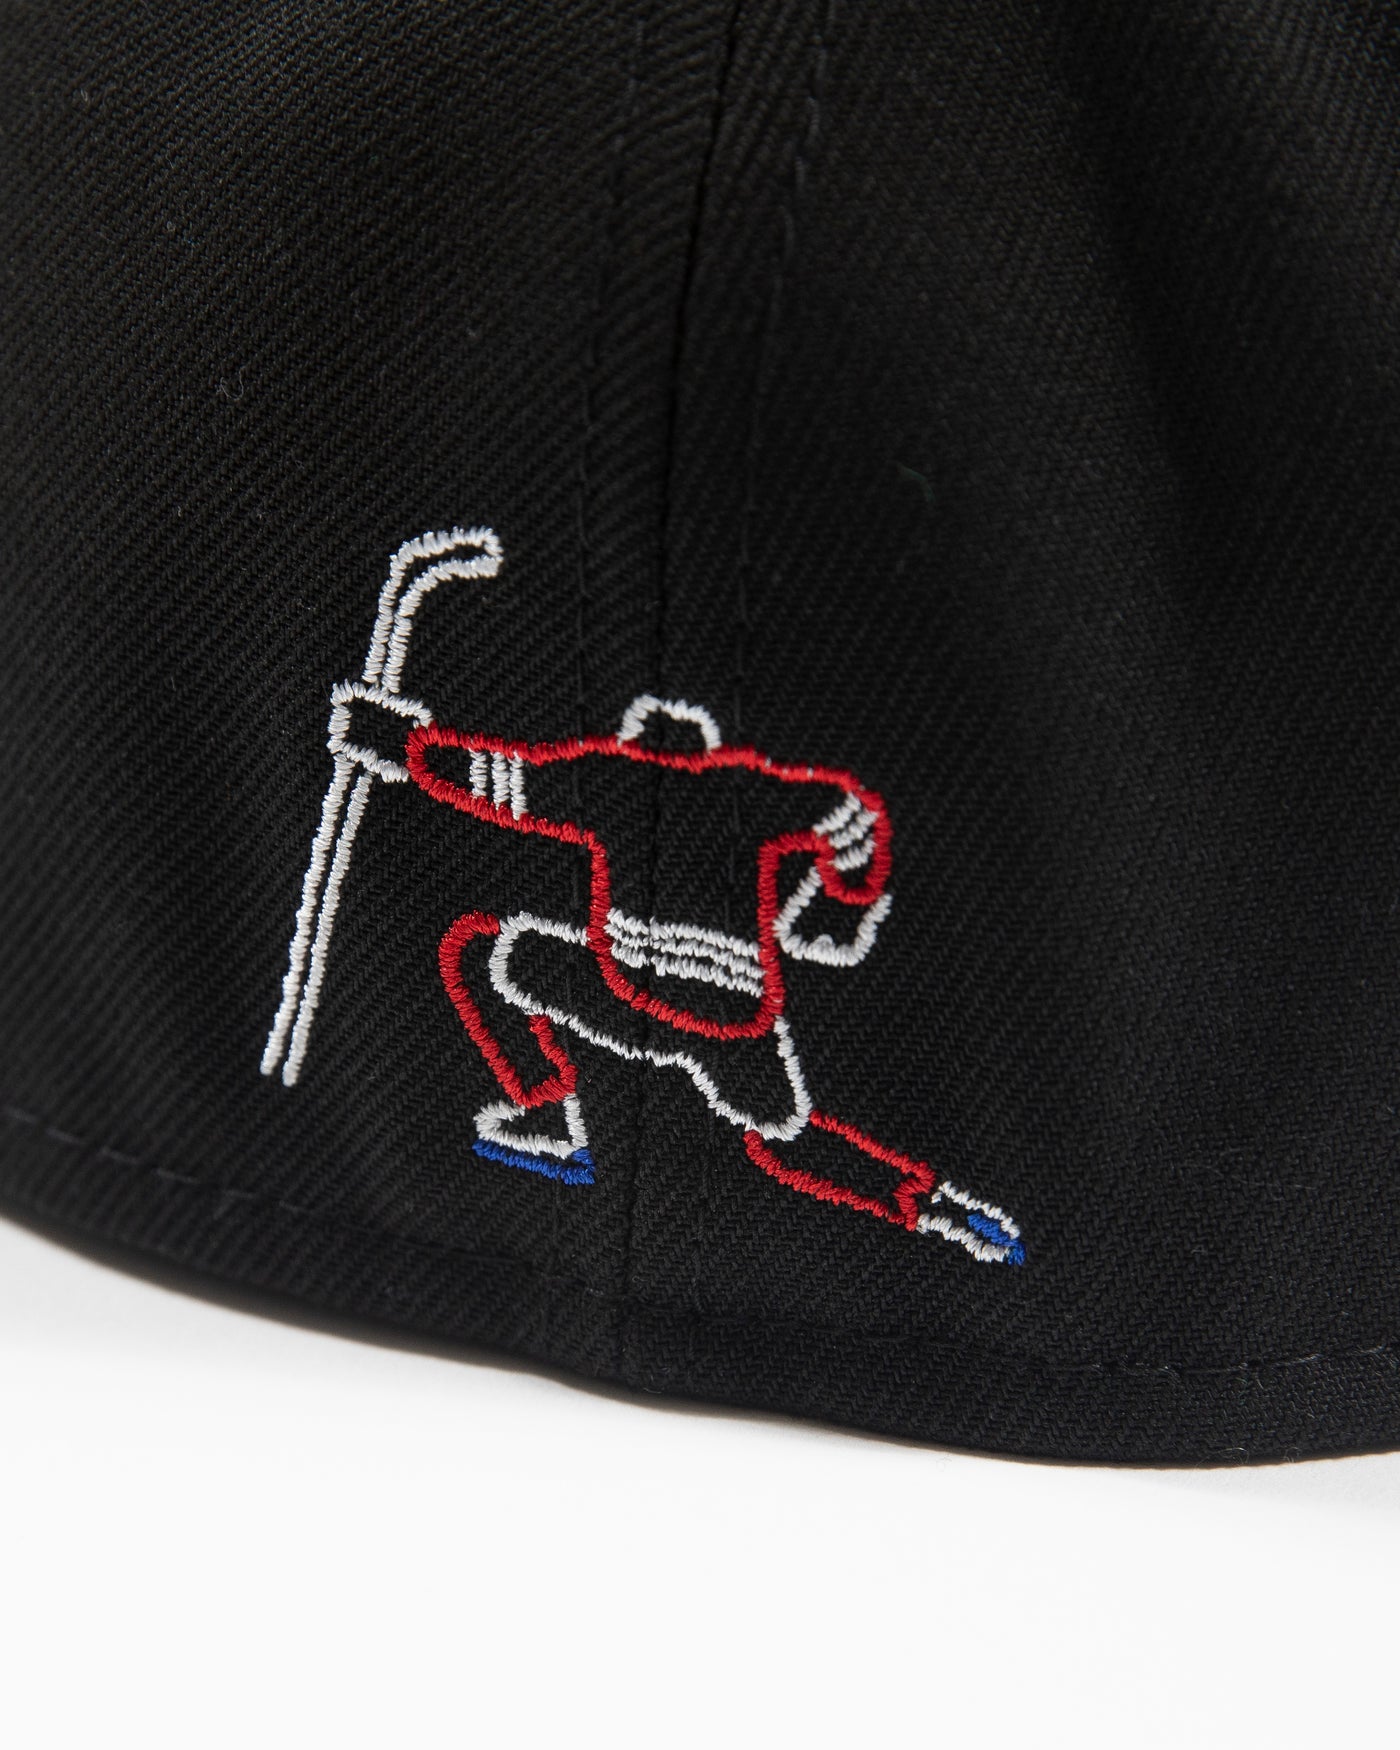 New Era black fitted hat with neon lights inspired primary logo - back detail view of embroidered celly decal